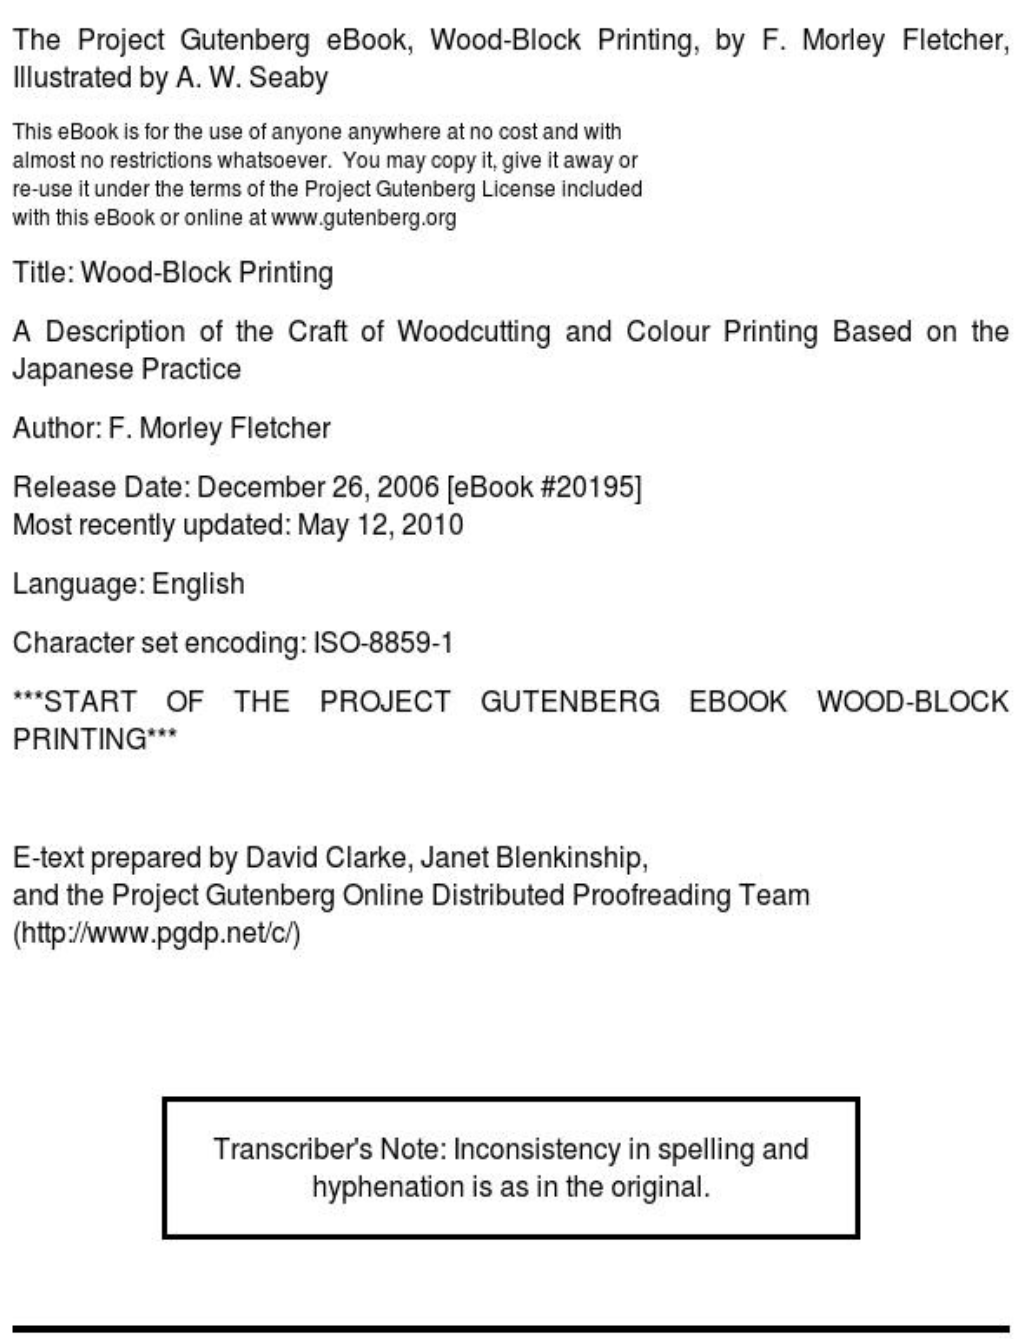 Wood-Block Printing / a Description of the Craft of Woodcutting and Colour